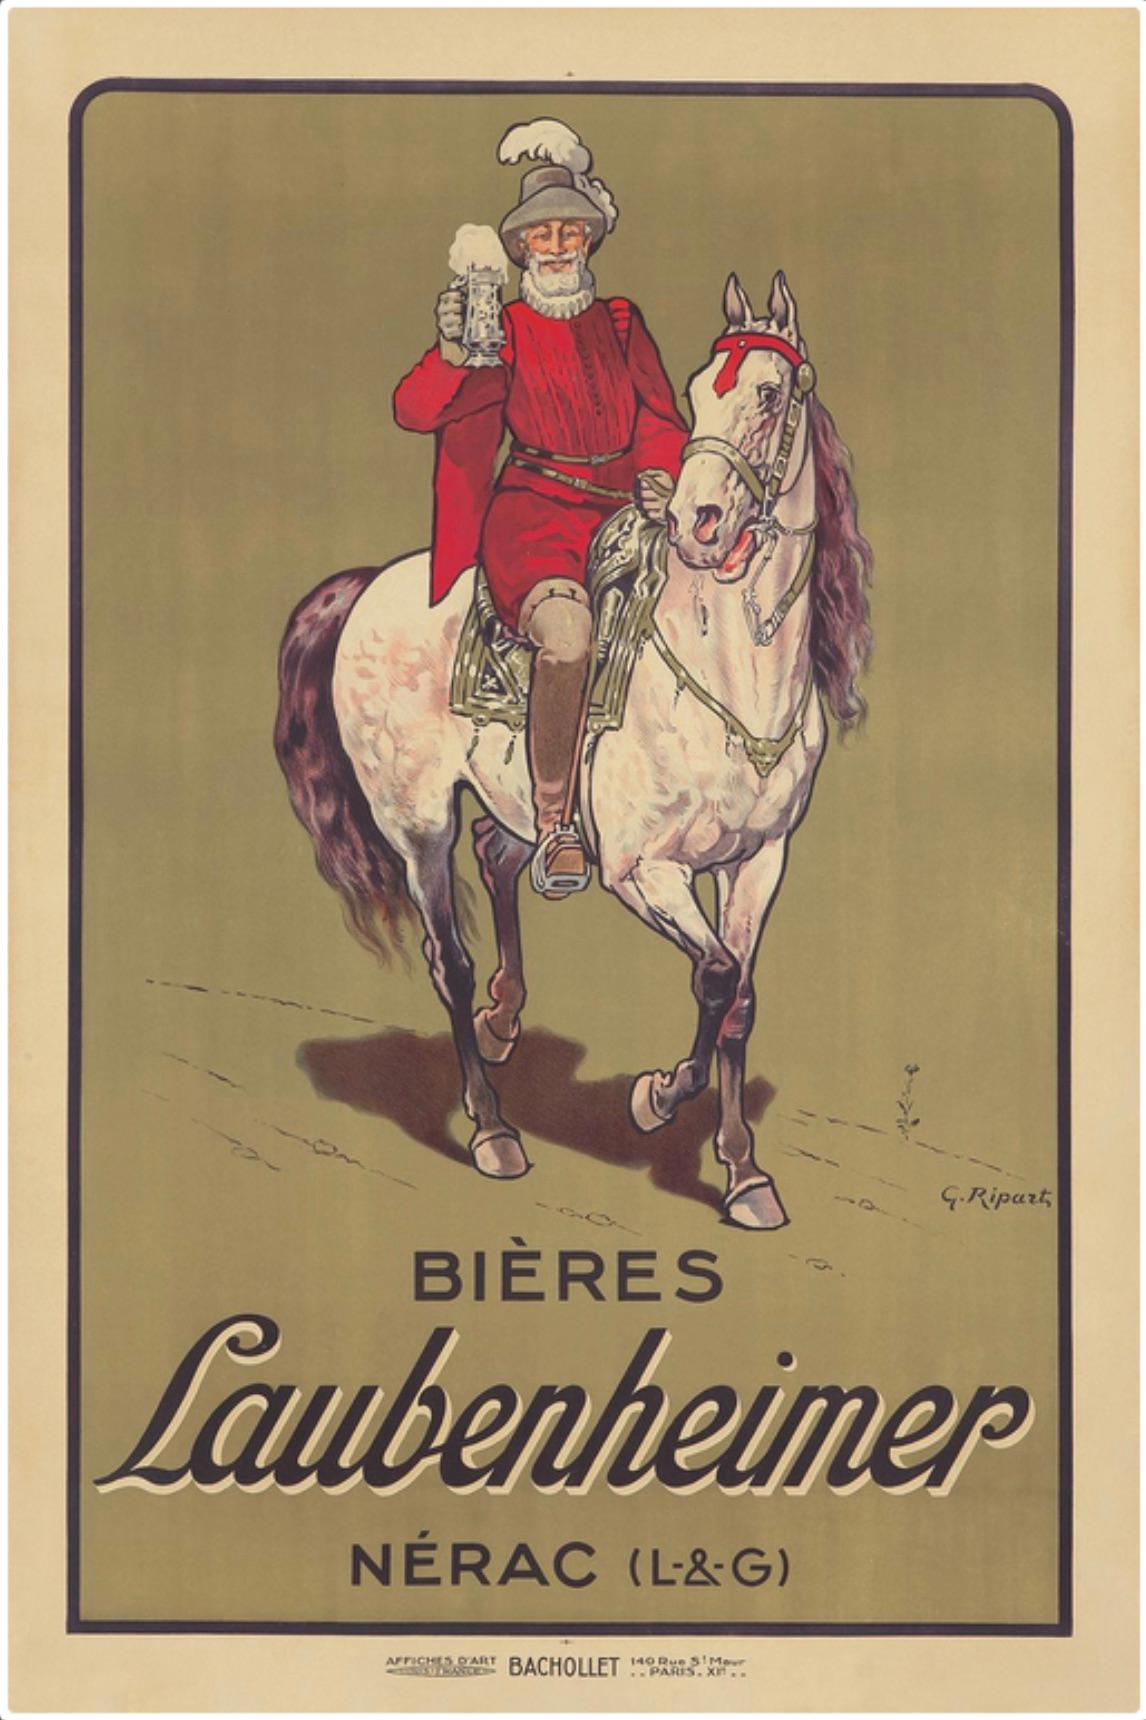 Artist: Georges Ripart (French, 1871 – 1933)

Date of Origin: 1905

Medium: Original Stone Lithograph Vintage Poster

Size: 27×32”

 

Ripart depicts King Henry IV atop his famous white horse to promote this southwestern French beer’s connection to